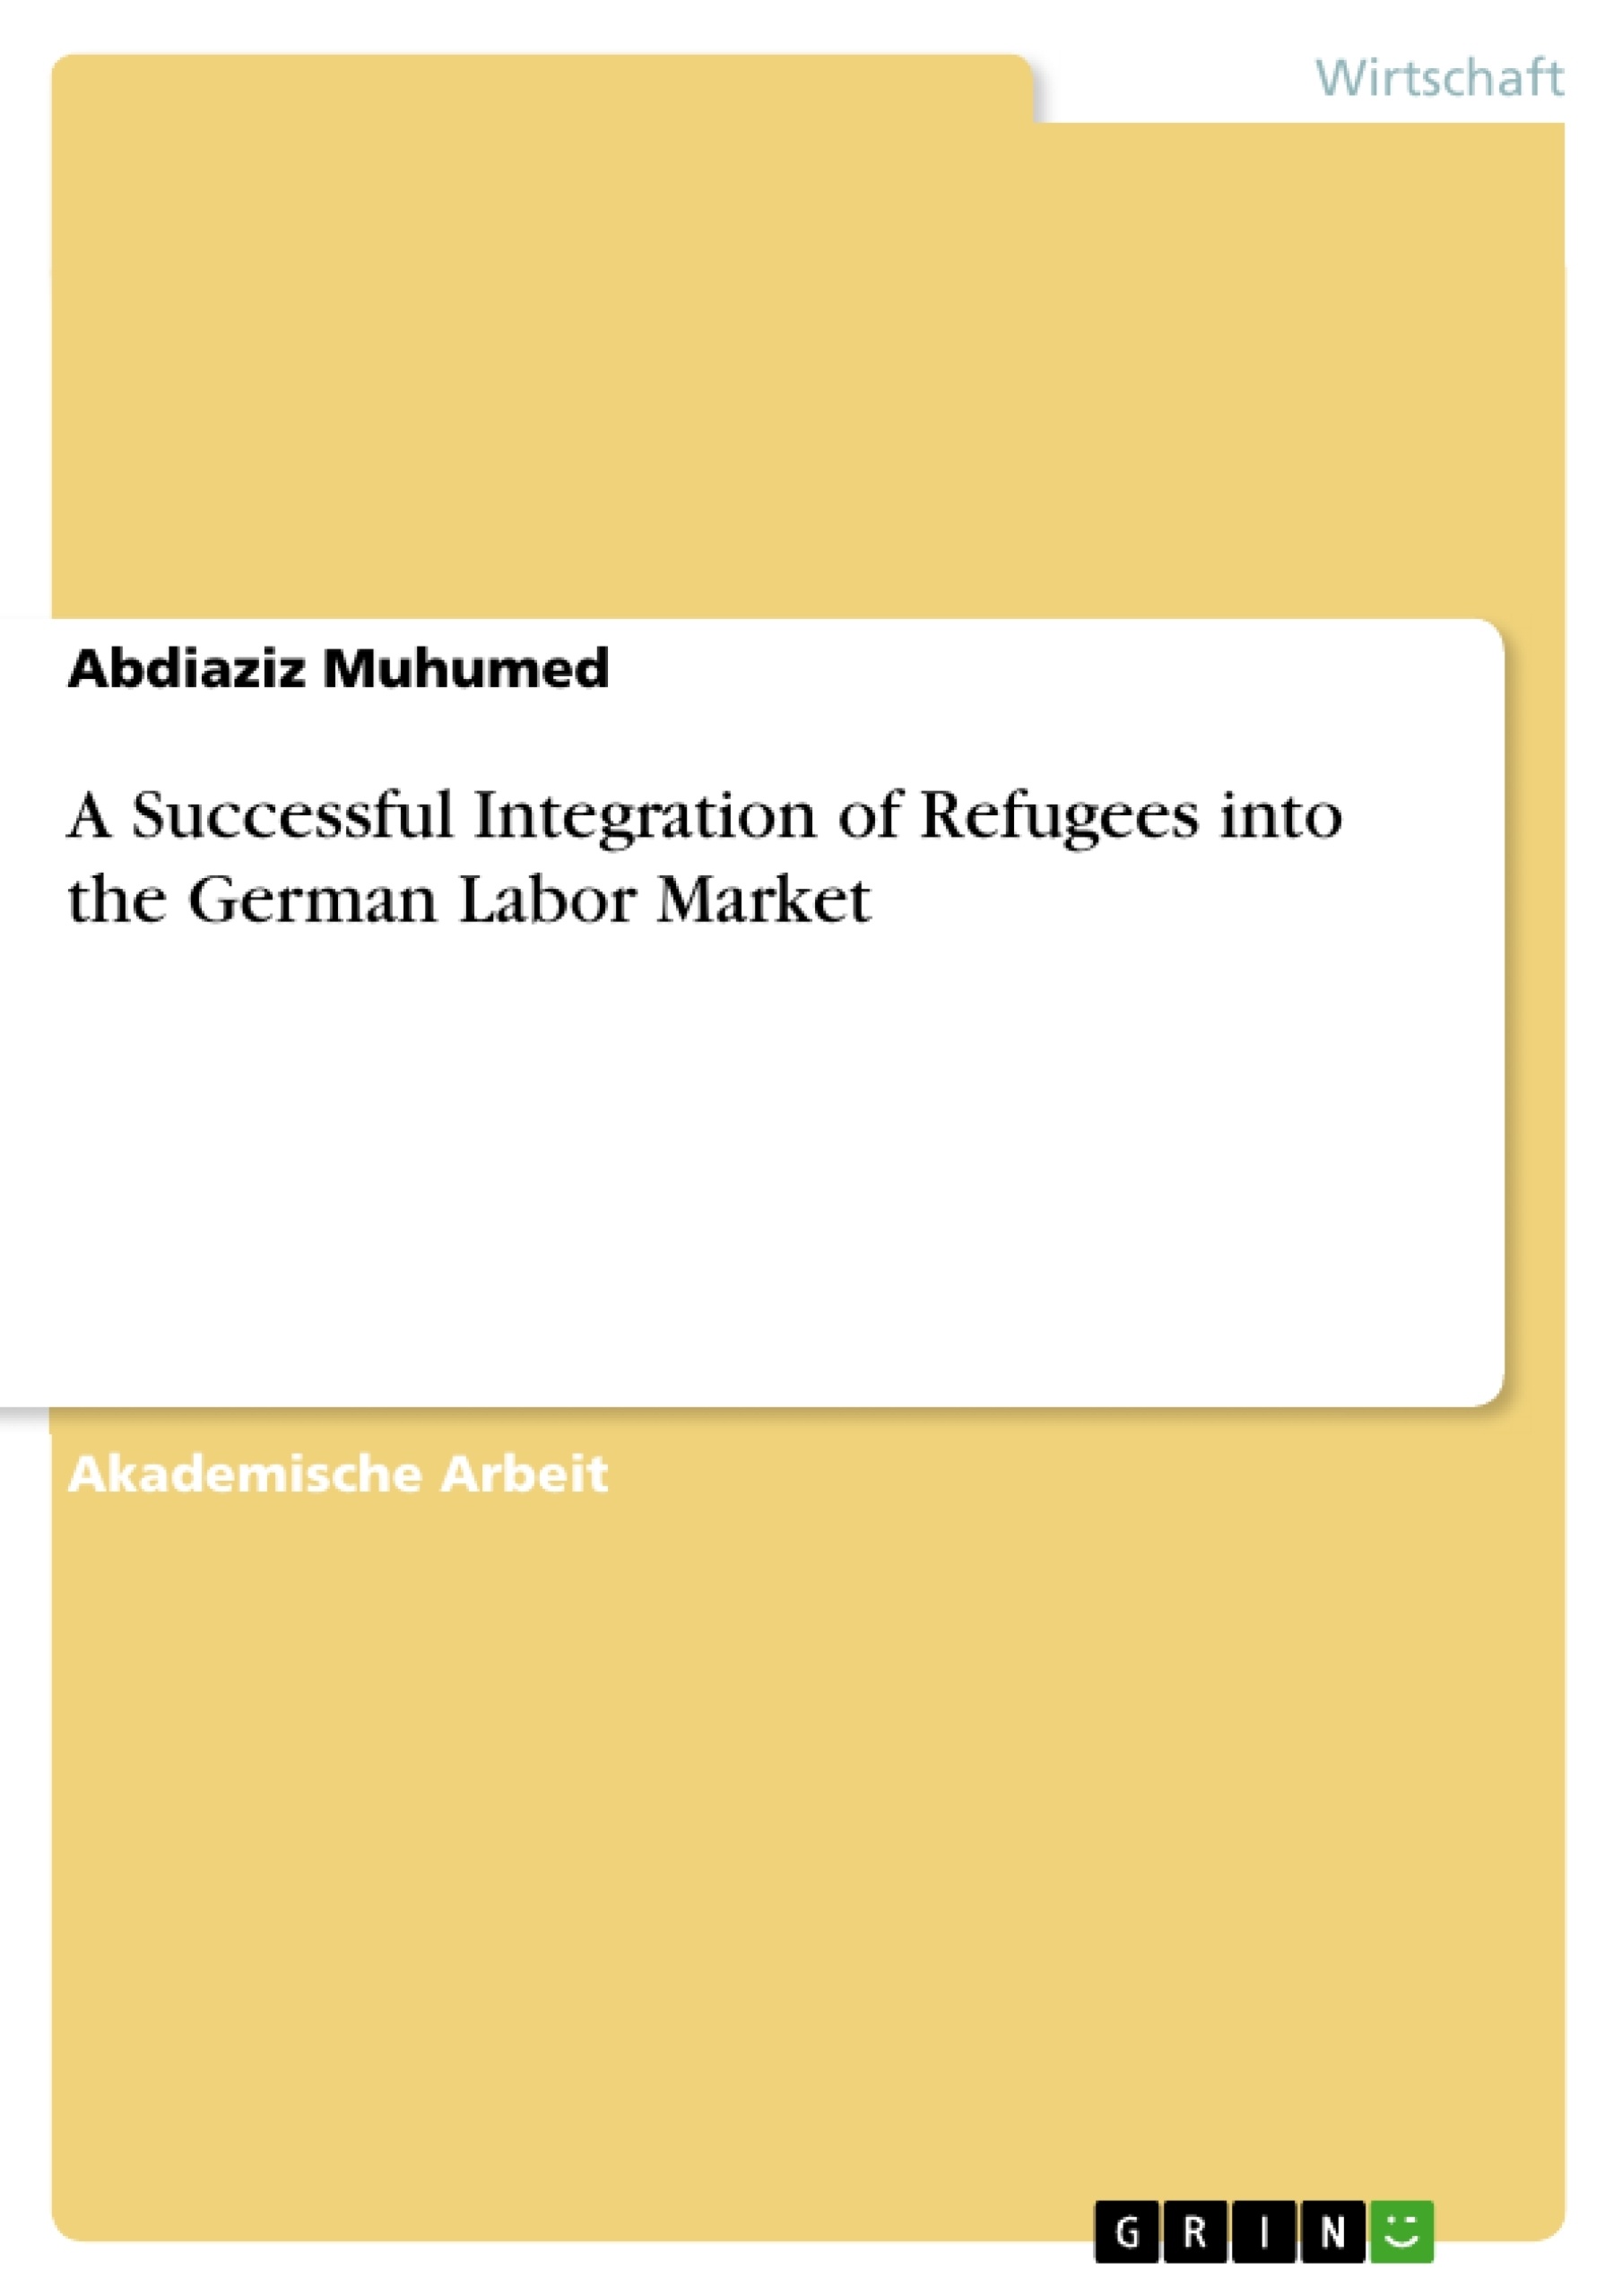 Titel: A Successful Integration of Refugees into the German Labor Market